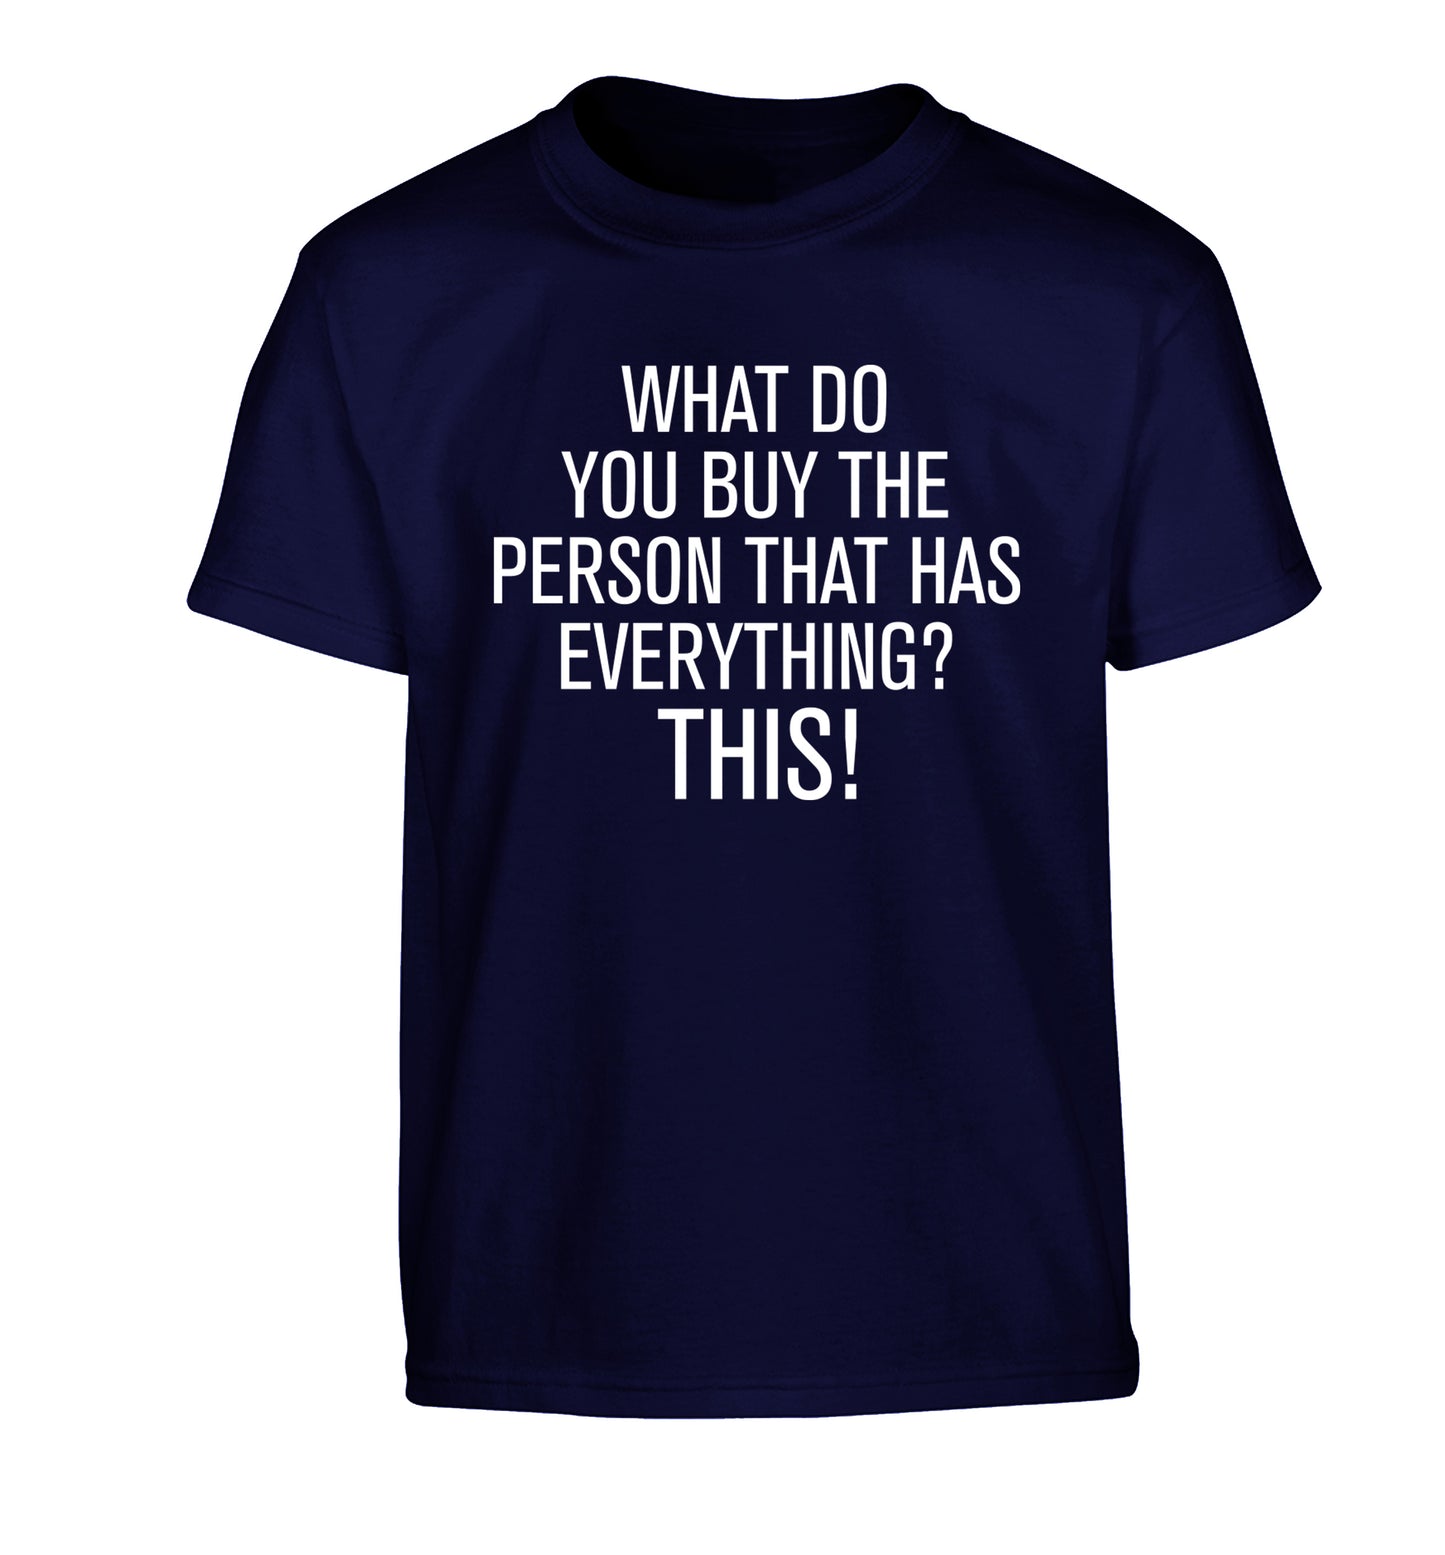 What do you buy the person that has everything? This! Children's navy Tshirt 12-13 Years